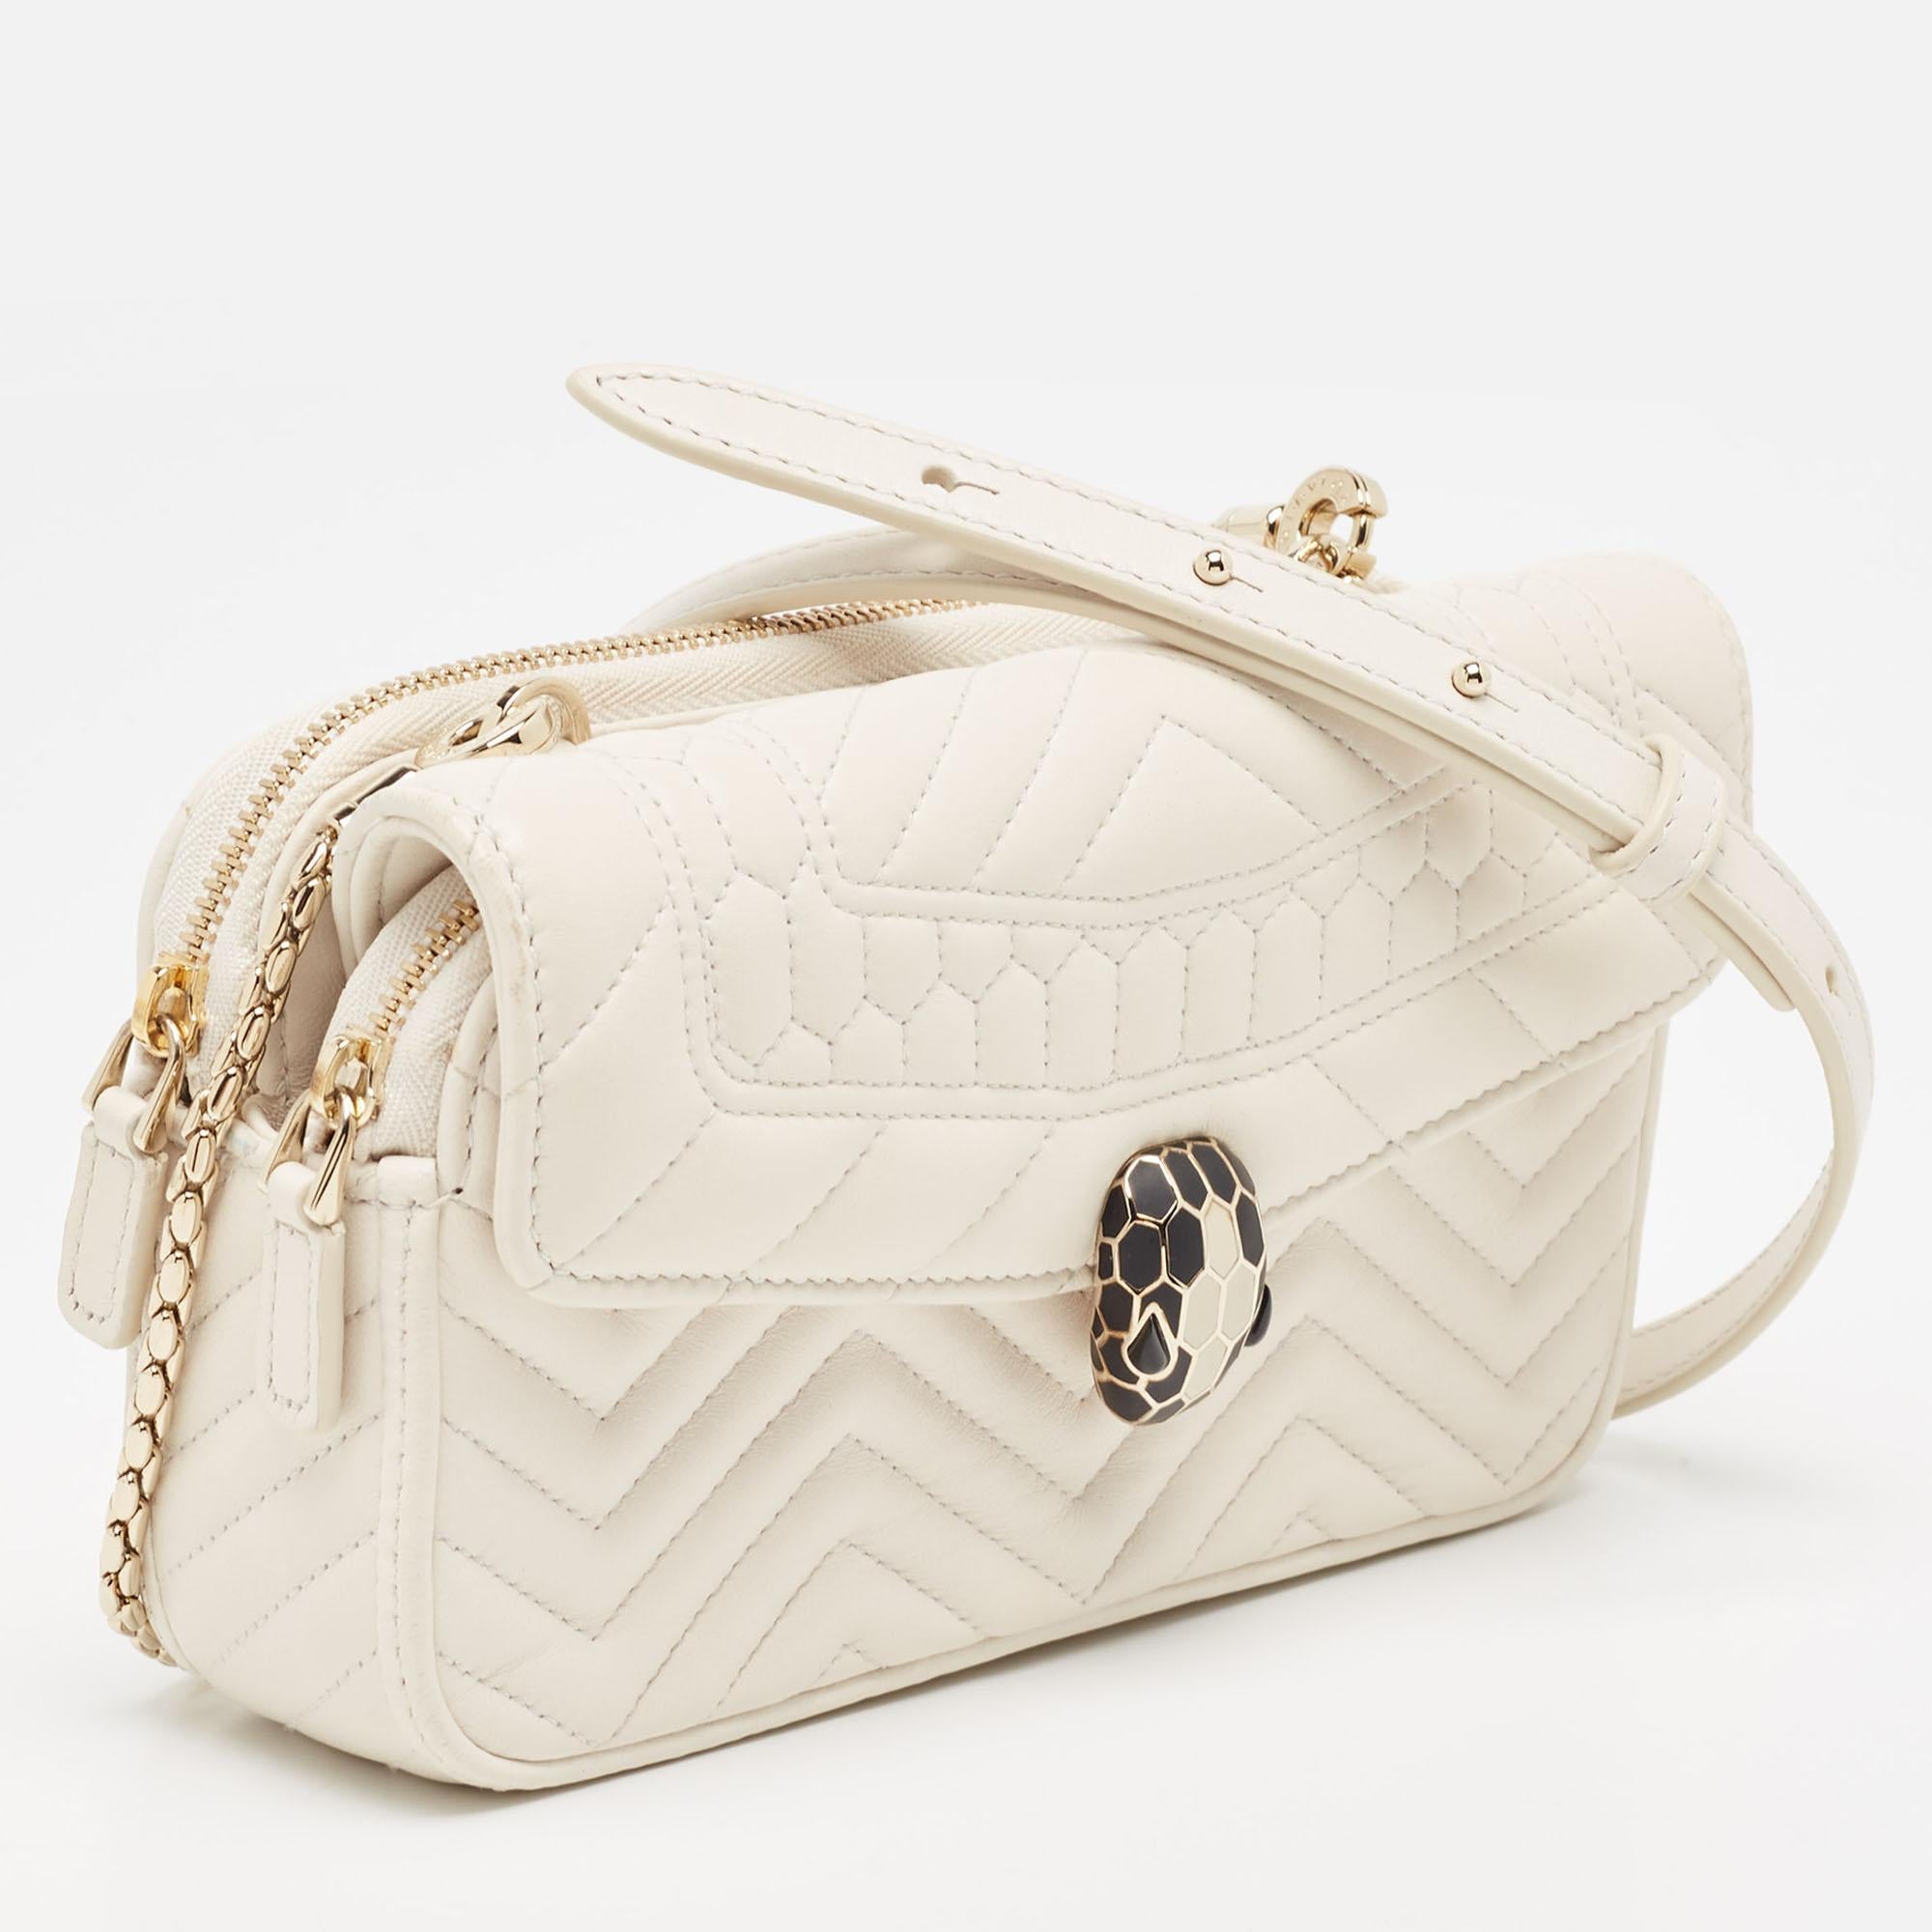 Bvlgari Off White Quilted Leather Serpenti Forever Convertible Belt Bag In Excellent Condition For Sale In Dubai, Al Qouz 2